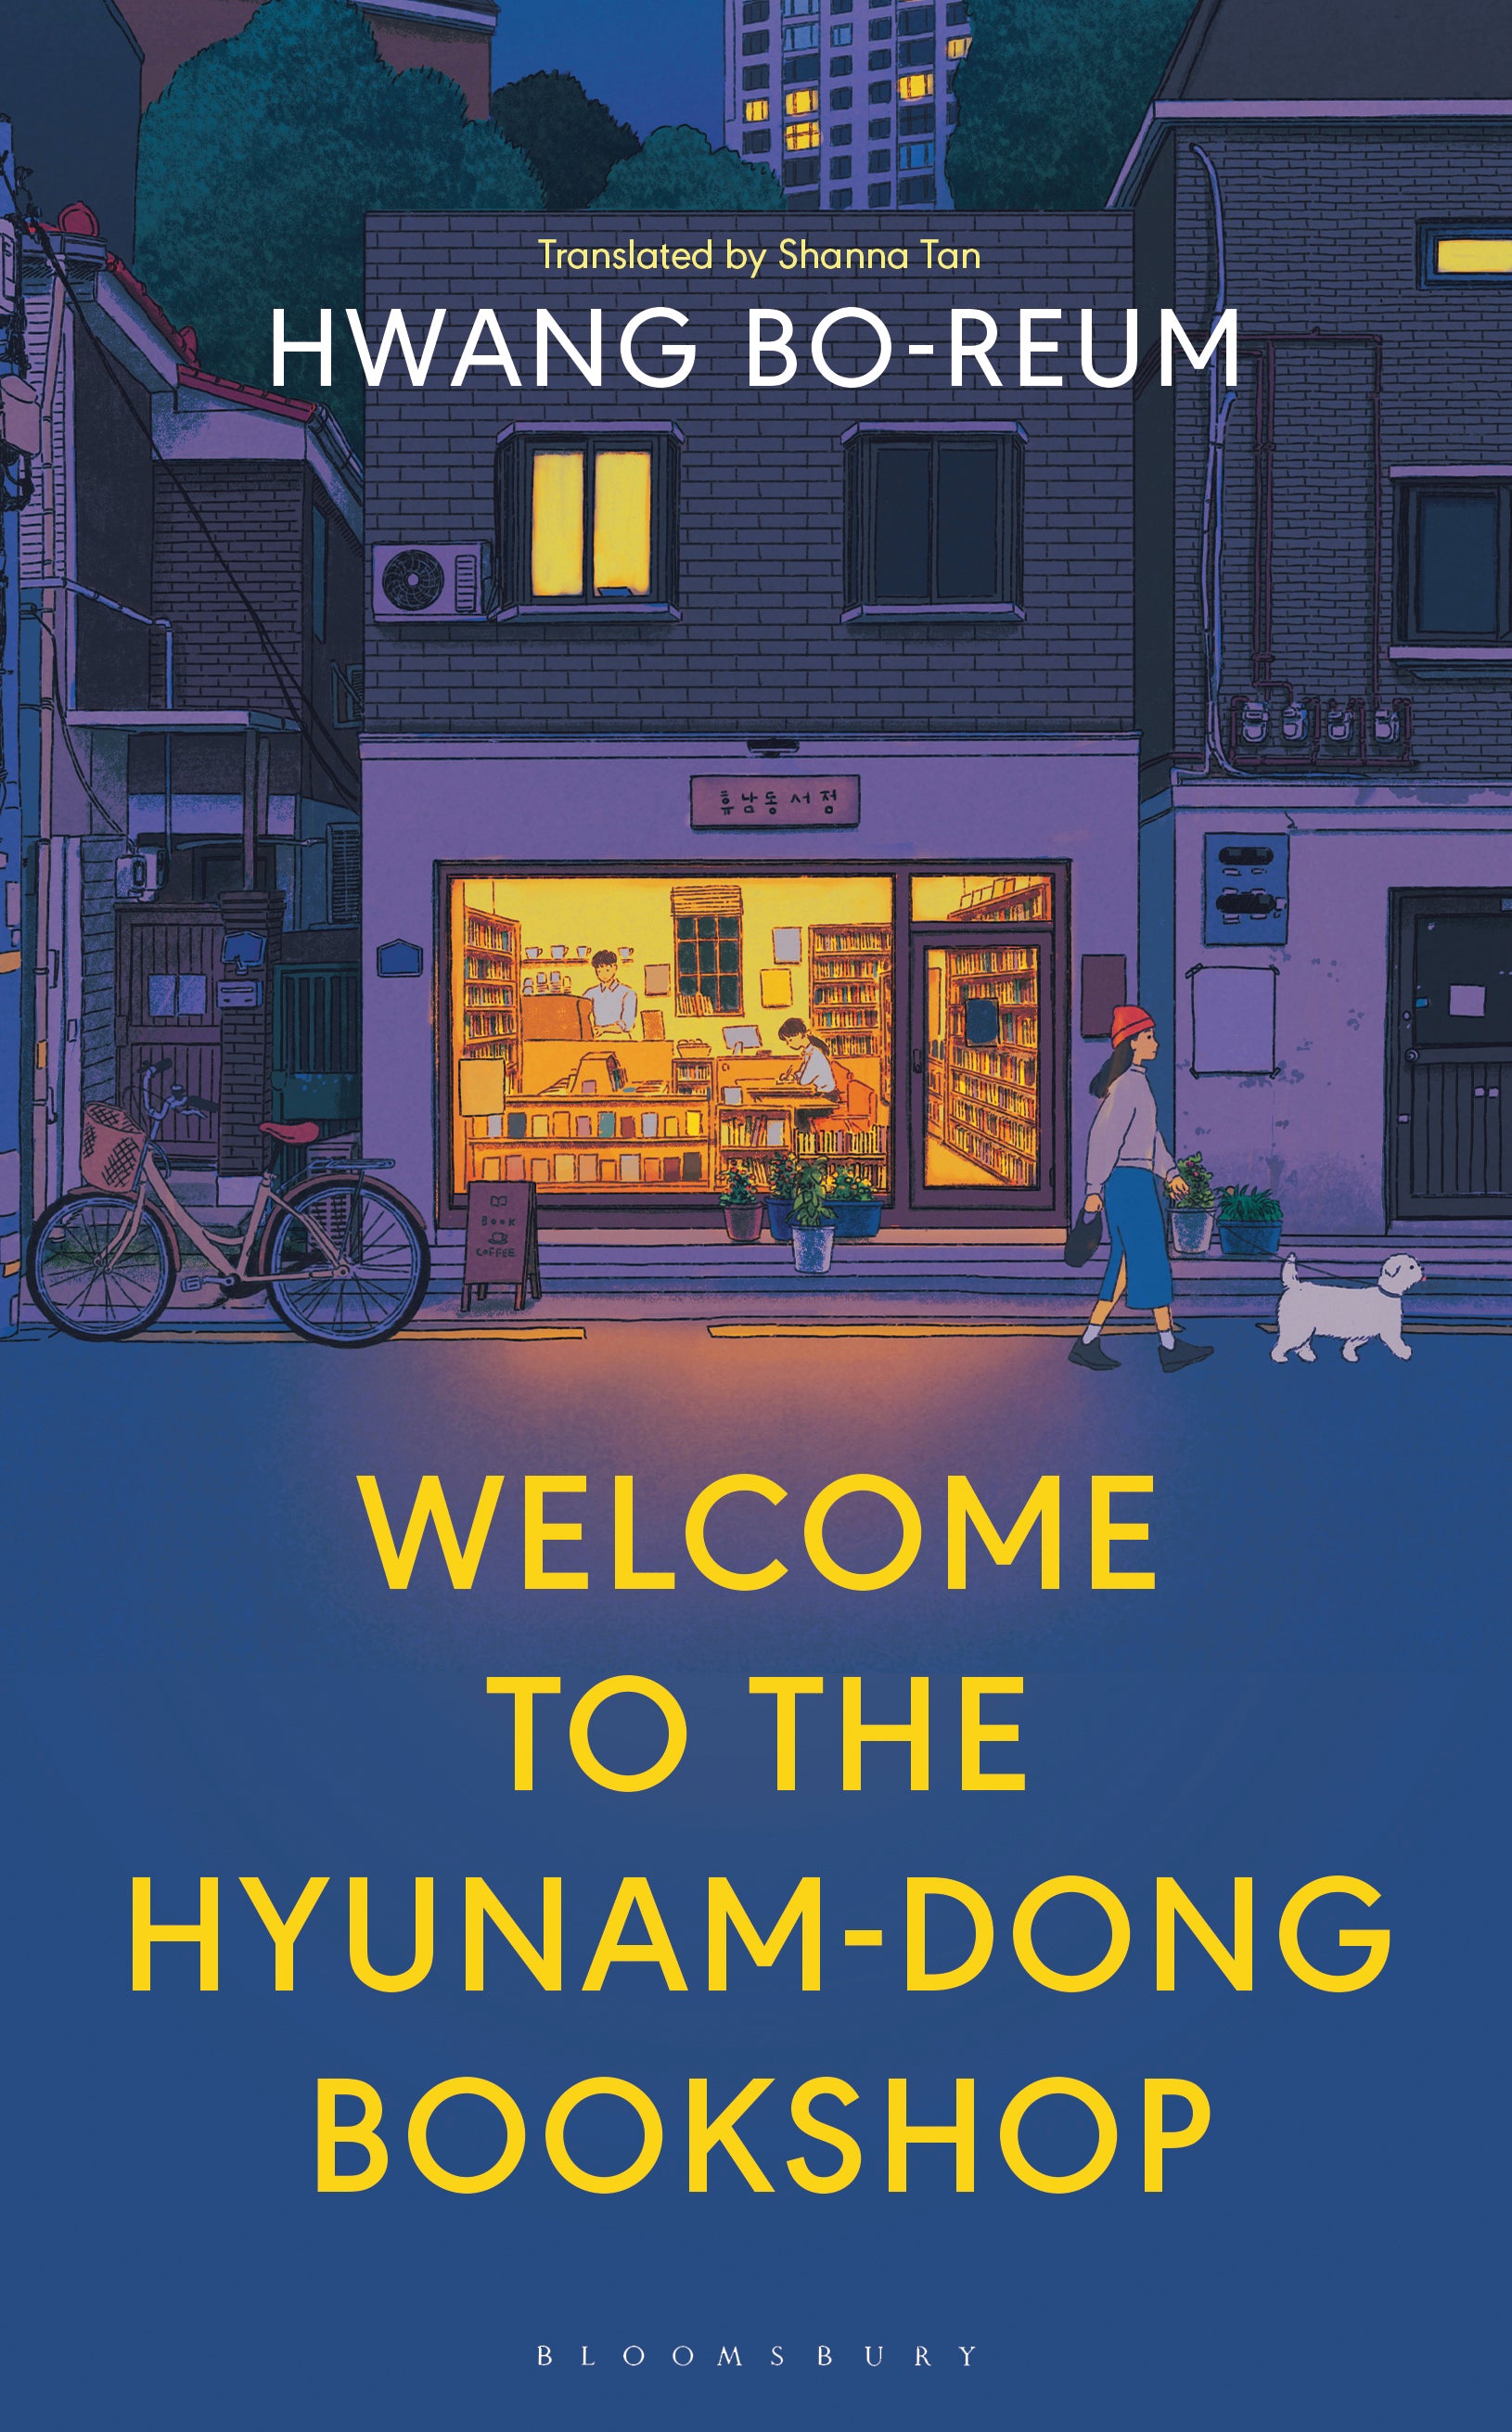 Welcome to Hyunam-dong Bookshop